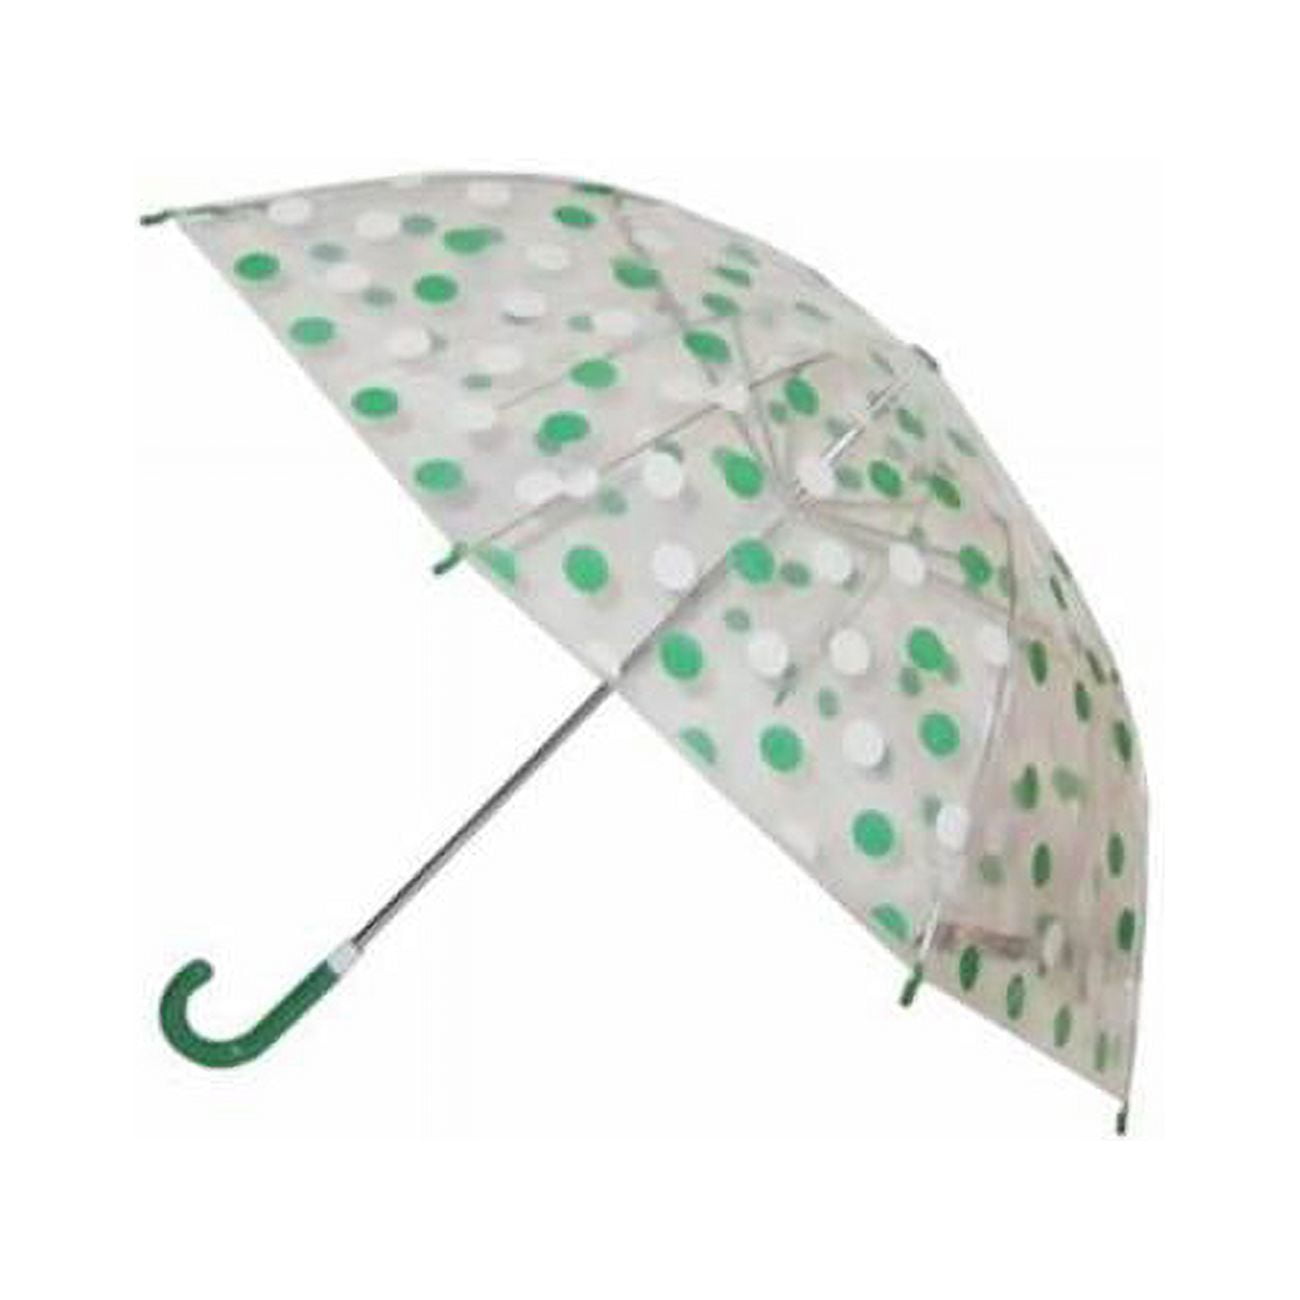 Picture of Conch F5302 Green Supermini in Polka Dot Print, Green